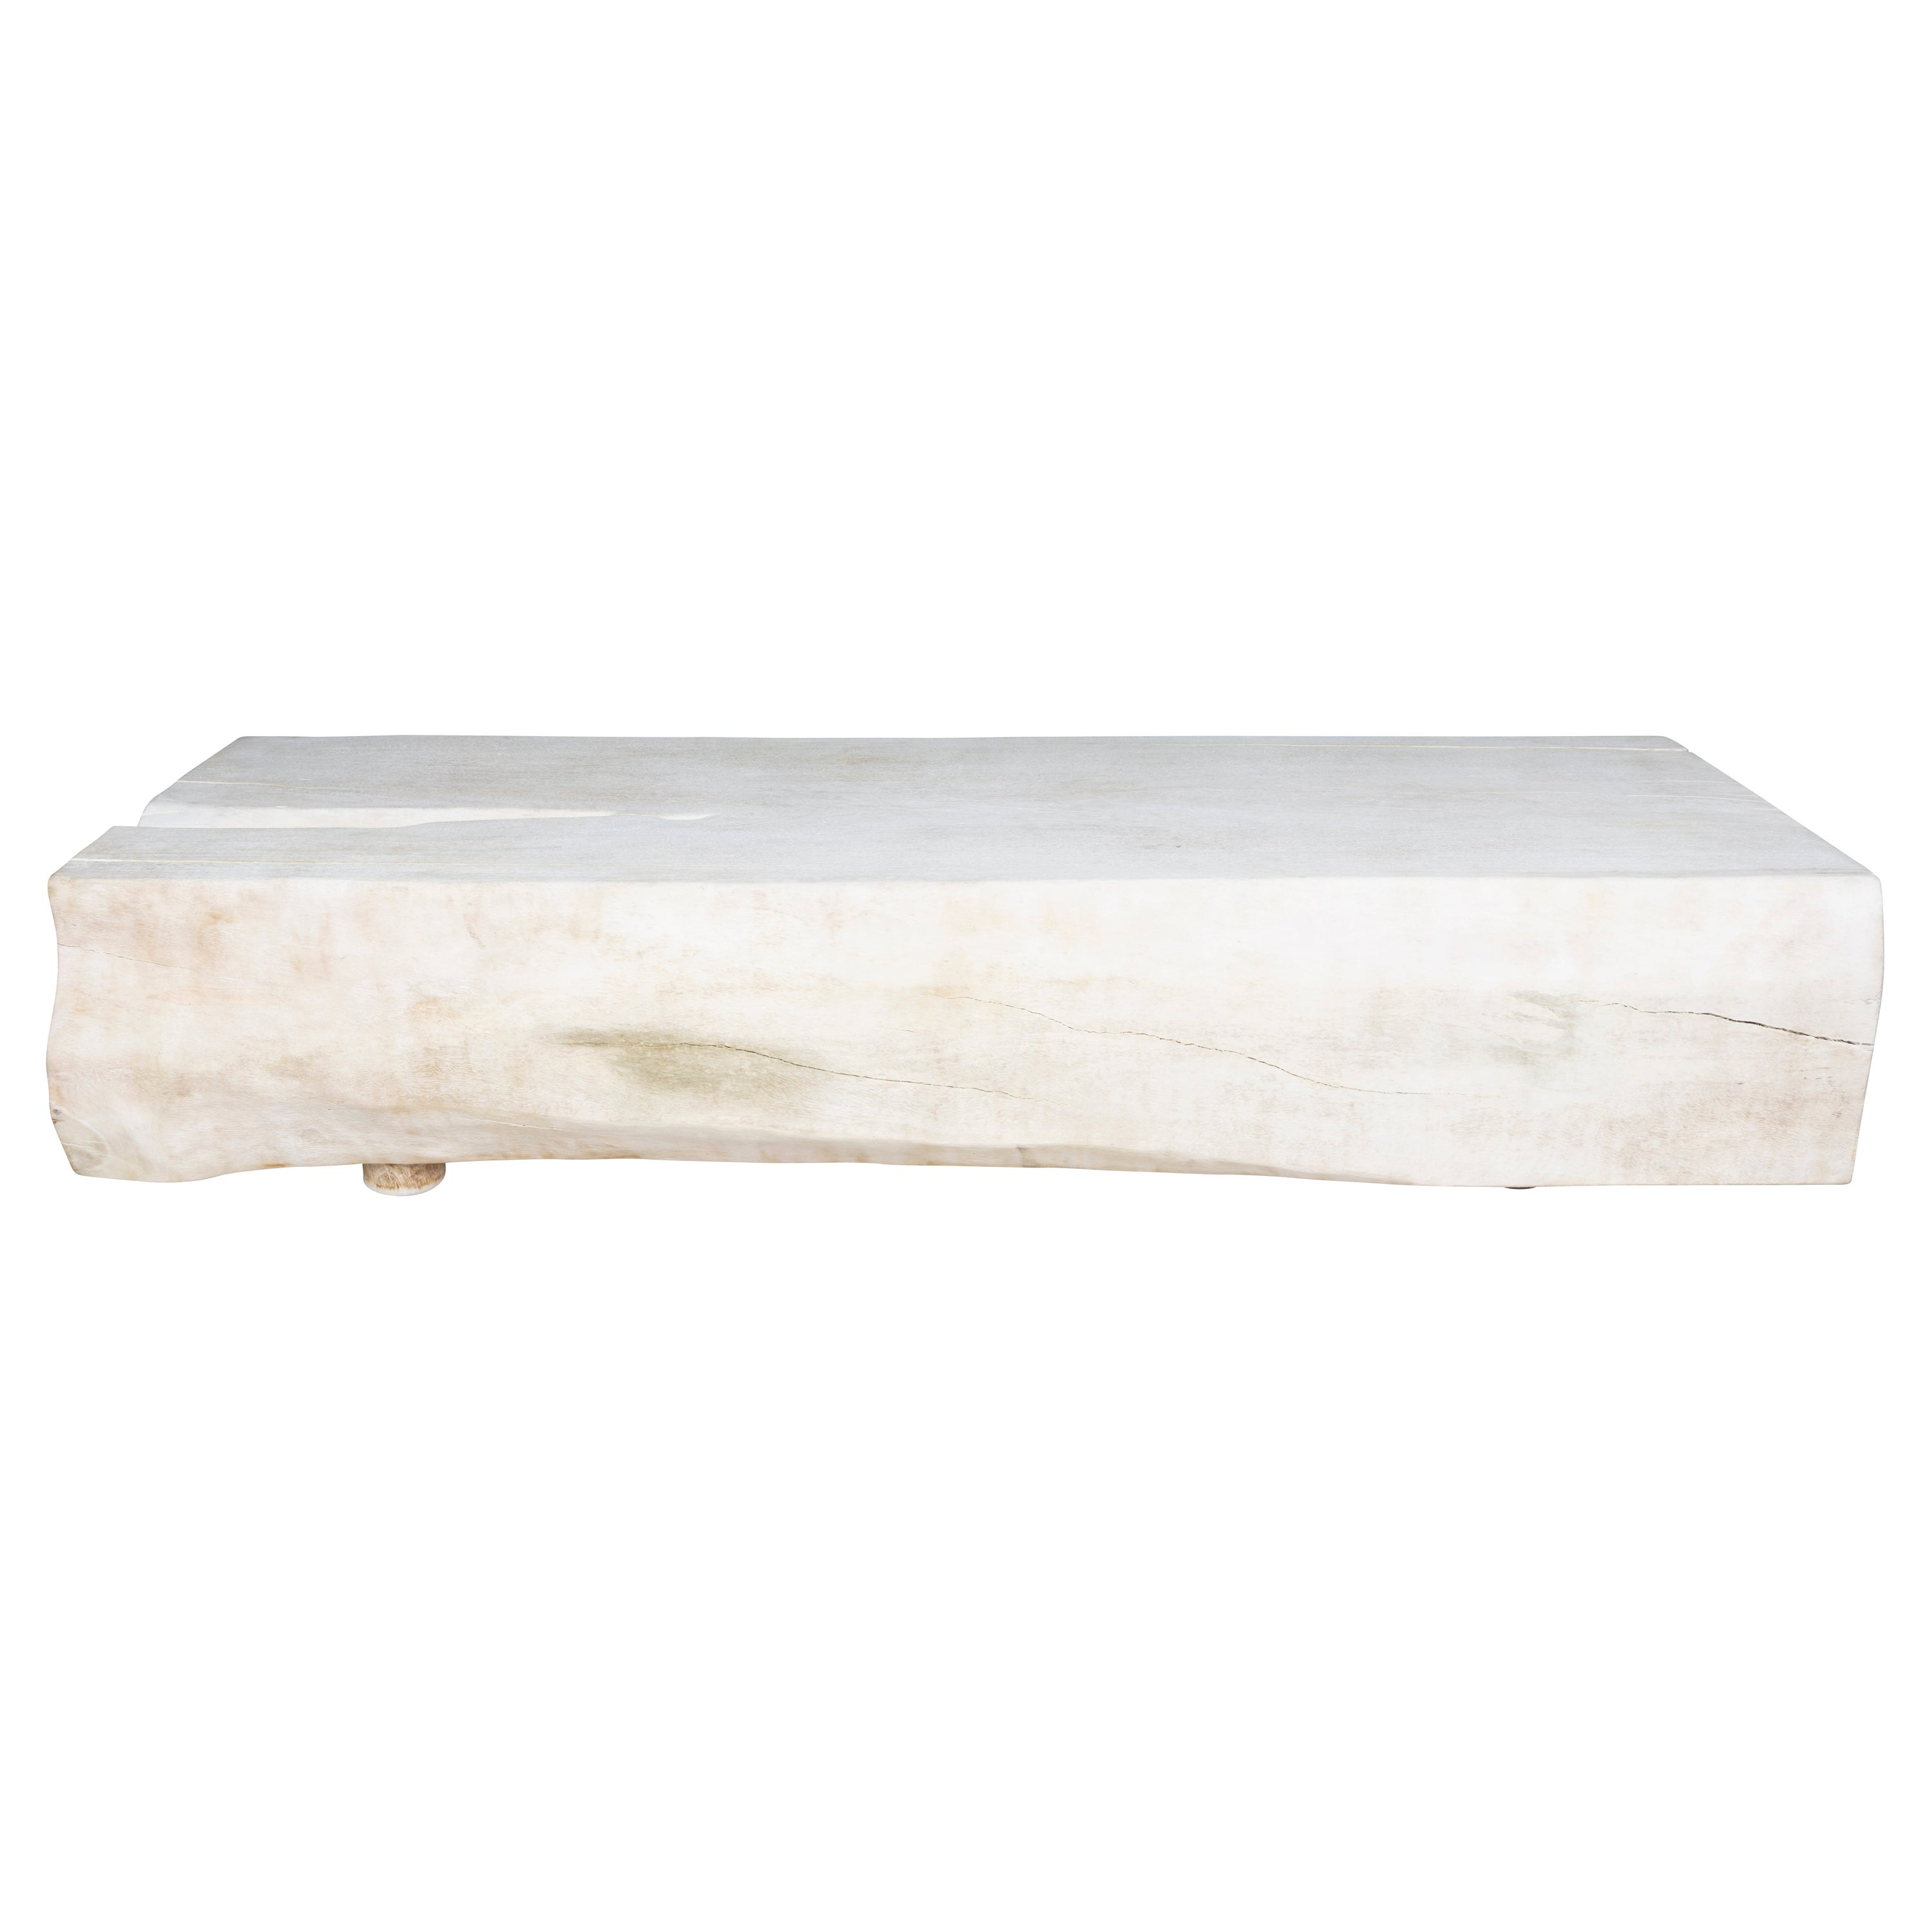 Monumental Bleached Lychee Wood Coffee Table